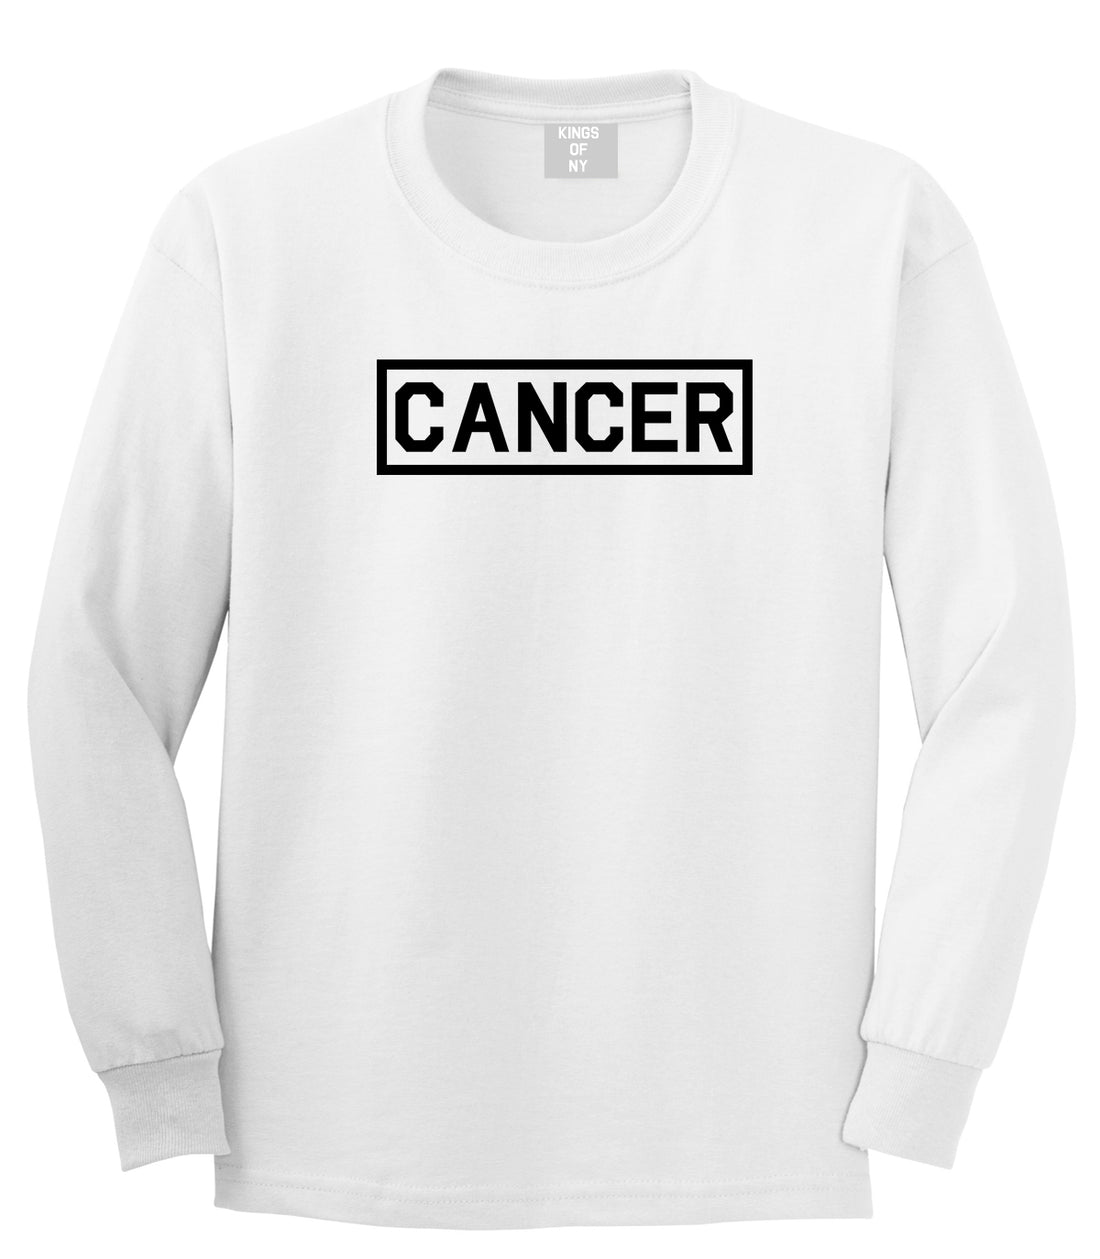 Cancer Horoscope Sign Mens White Long Sleeve T-Shirt by KINGS OF NY